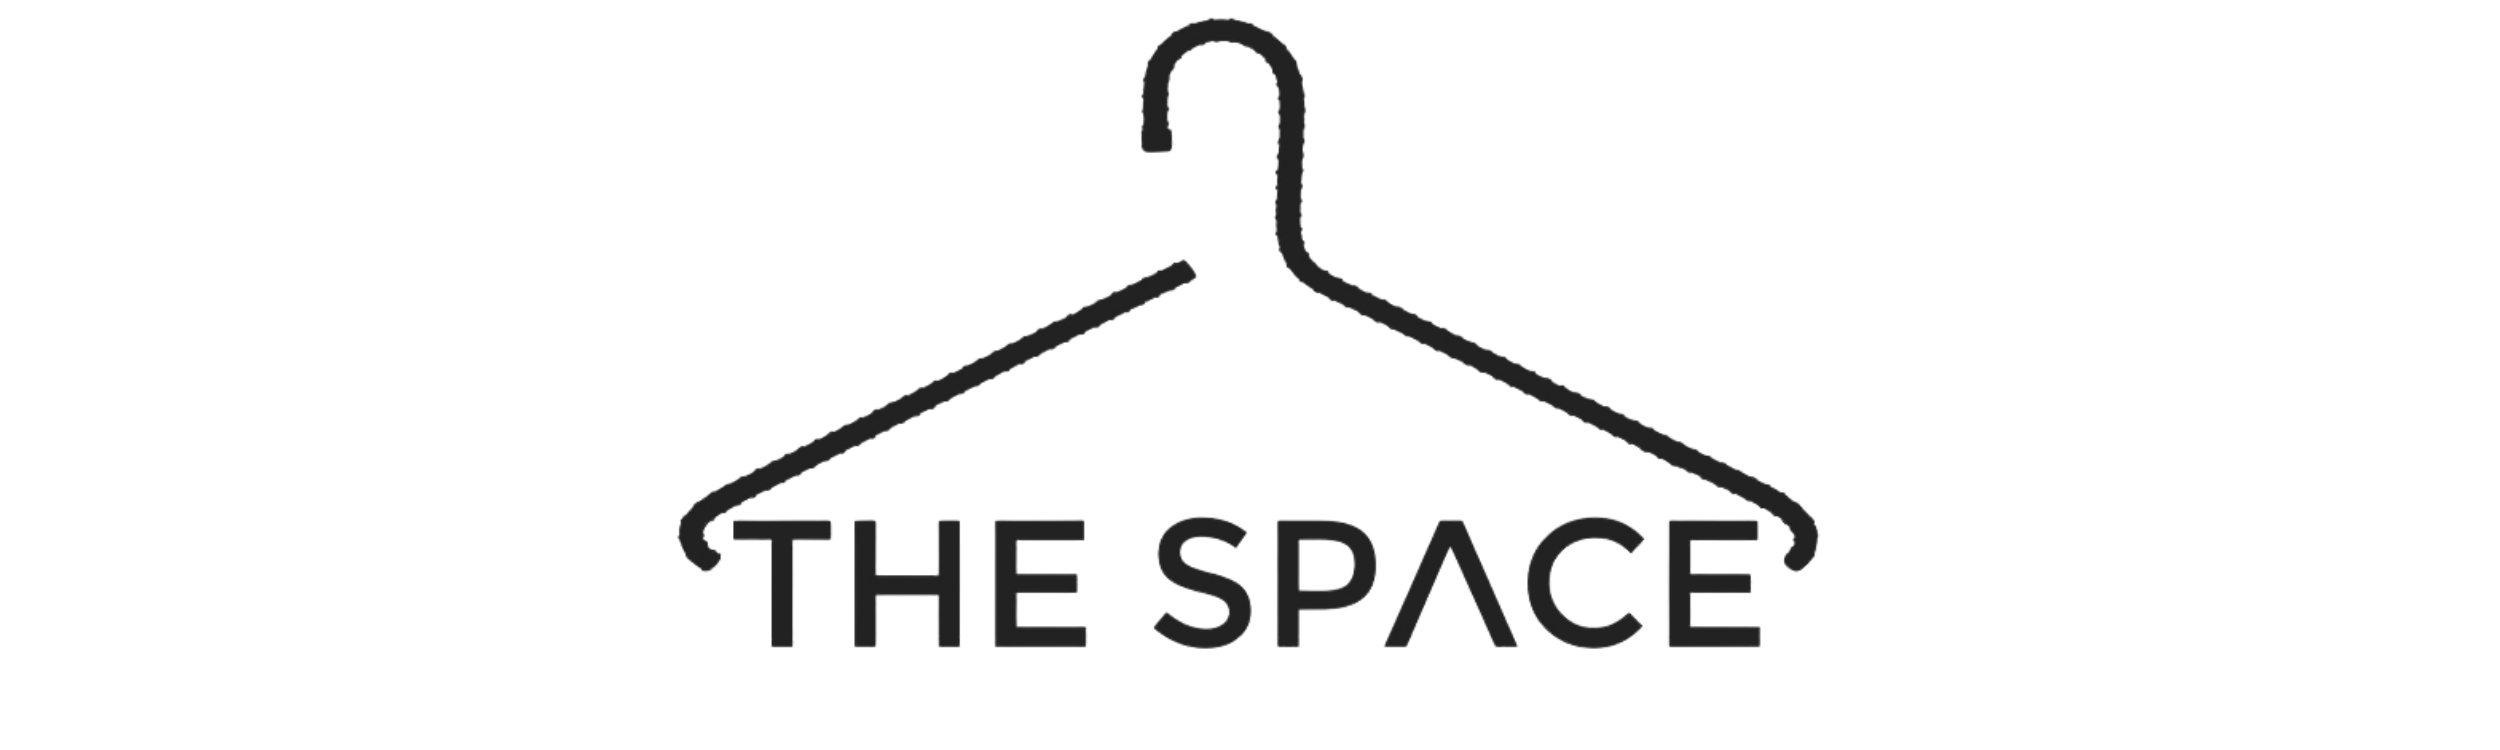 The space_OD